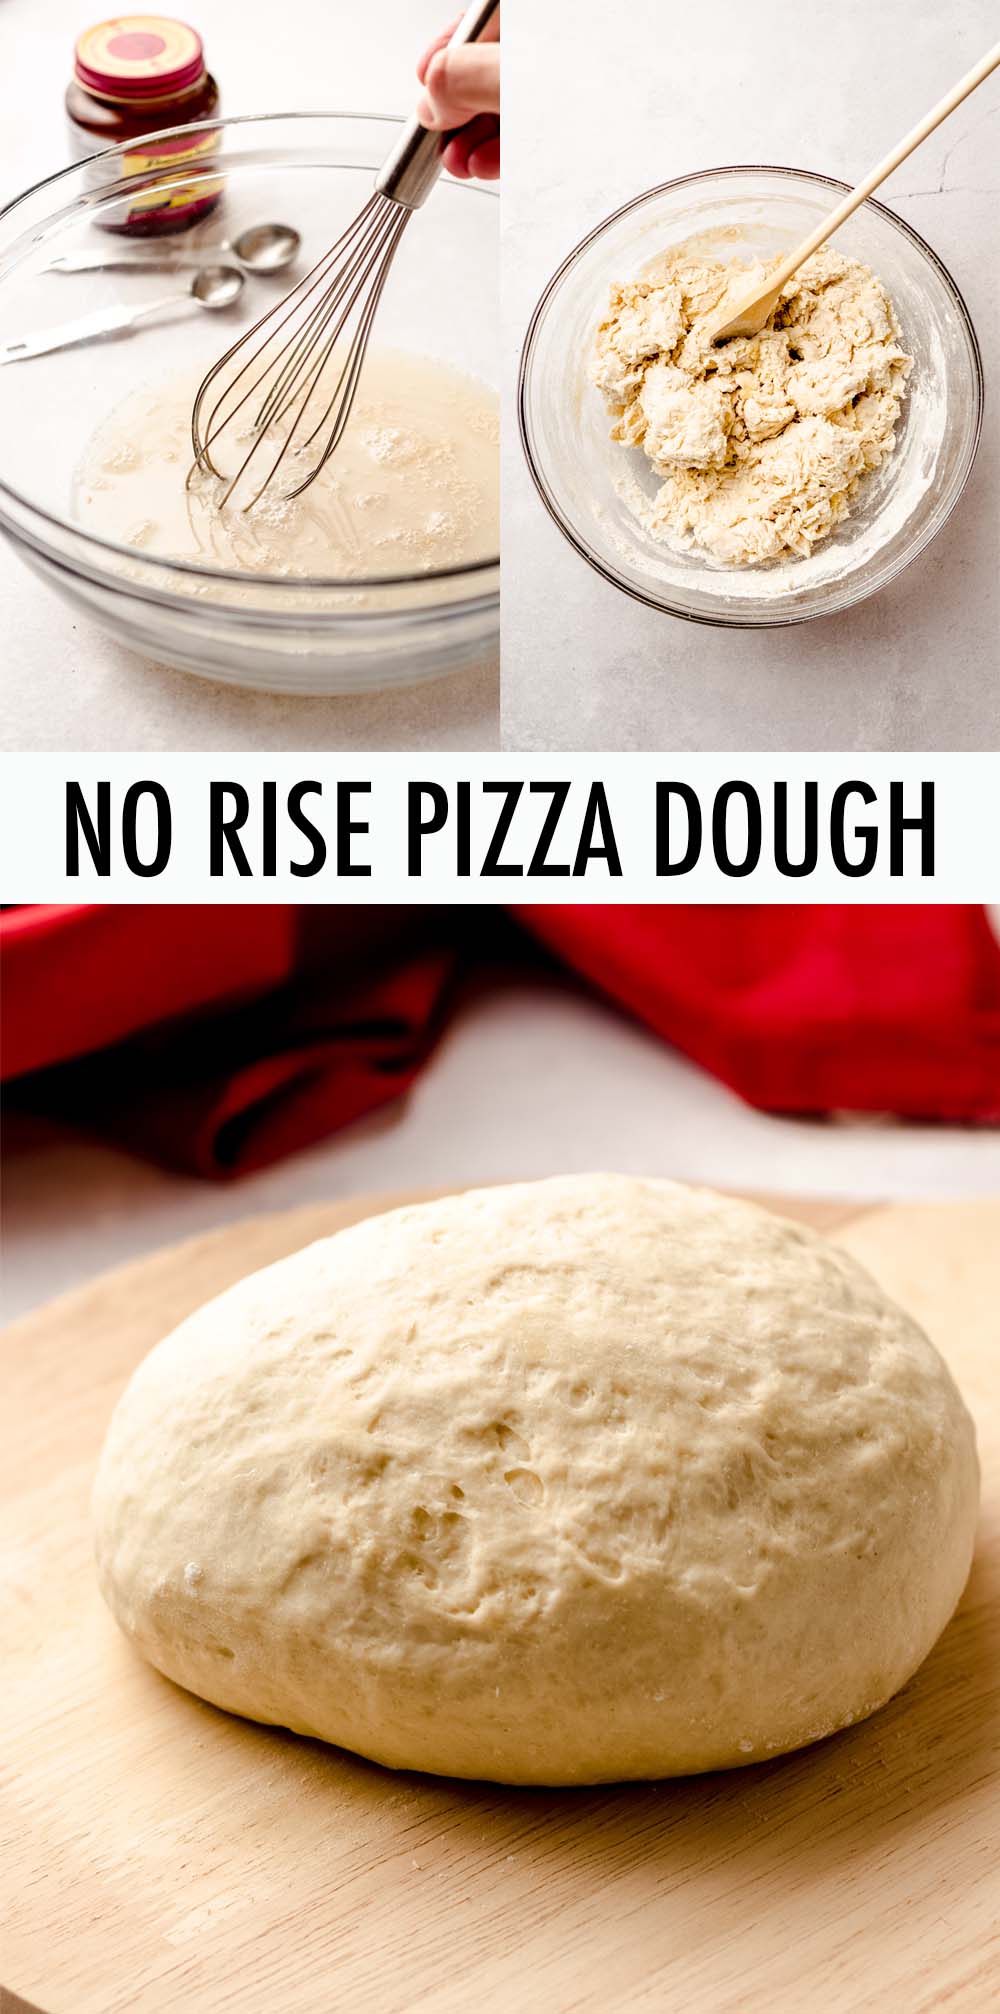 This easy homemade pizza dough recipe requires no rising time and is ready for all your favorite toppings in under 30 minutes. Recipe includes instructions for preparing ahead of time or freezing to use at a later time. via @frshaprilflours